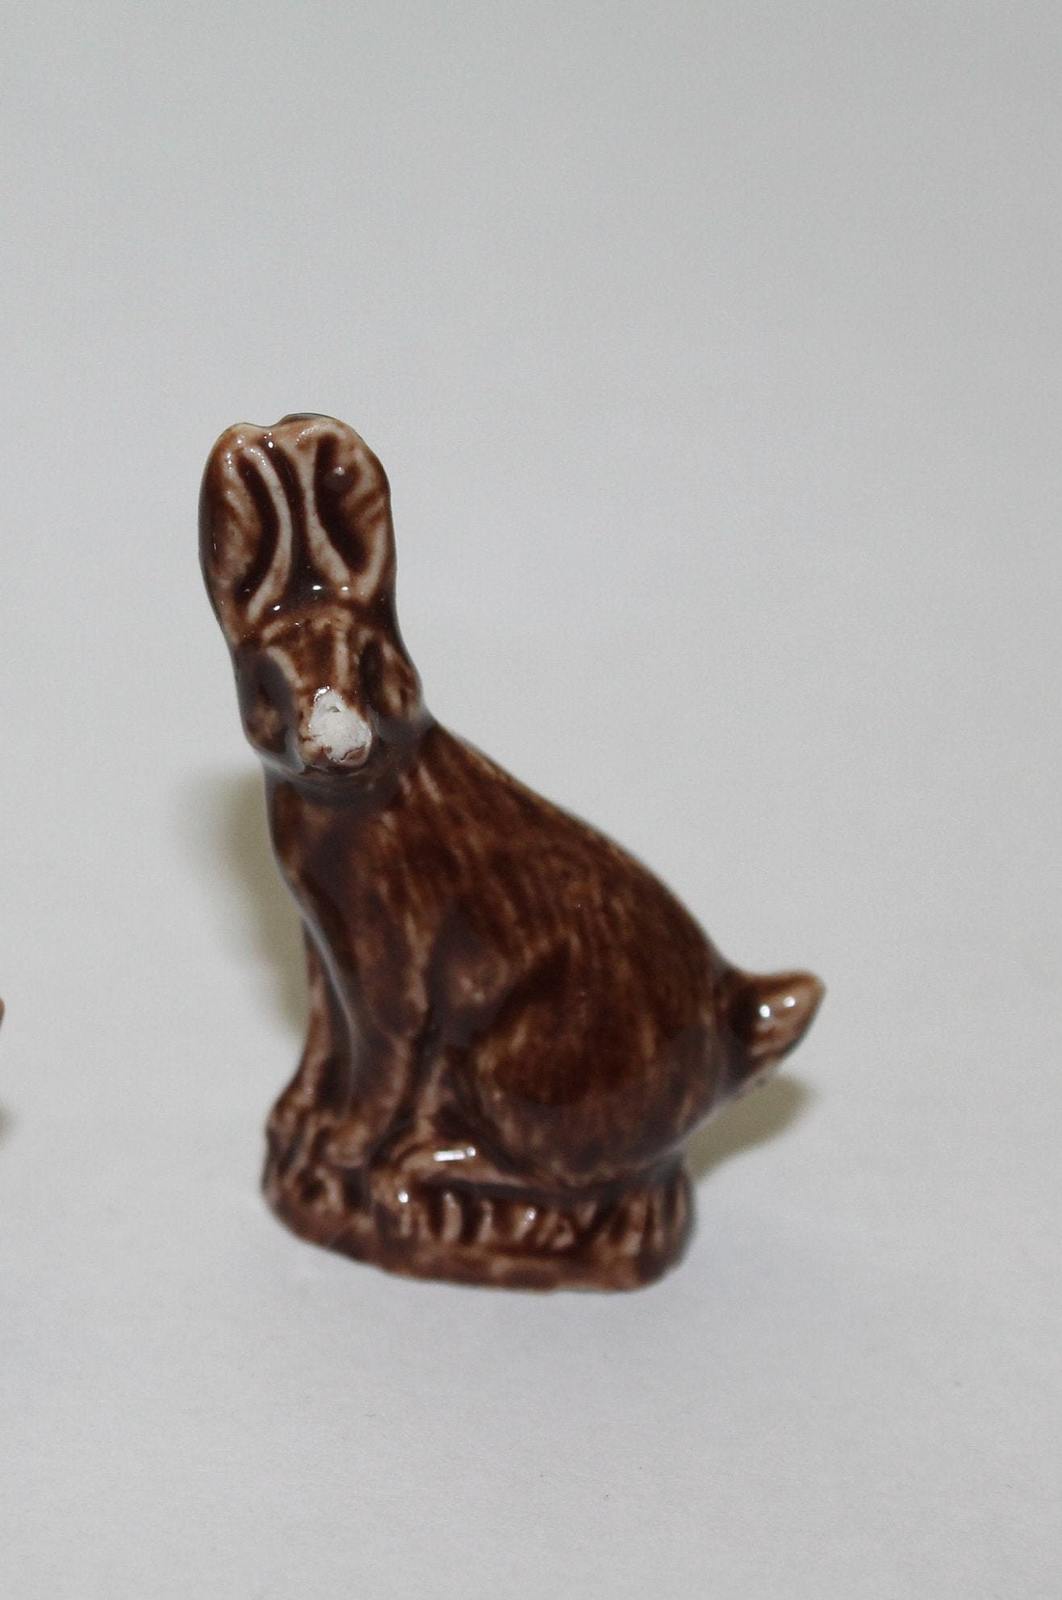 Chipped Wade Jack Rabbit Red Rose Tea Figurines From the 1st US Series 1983-1985 - $2.00